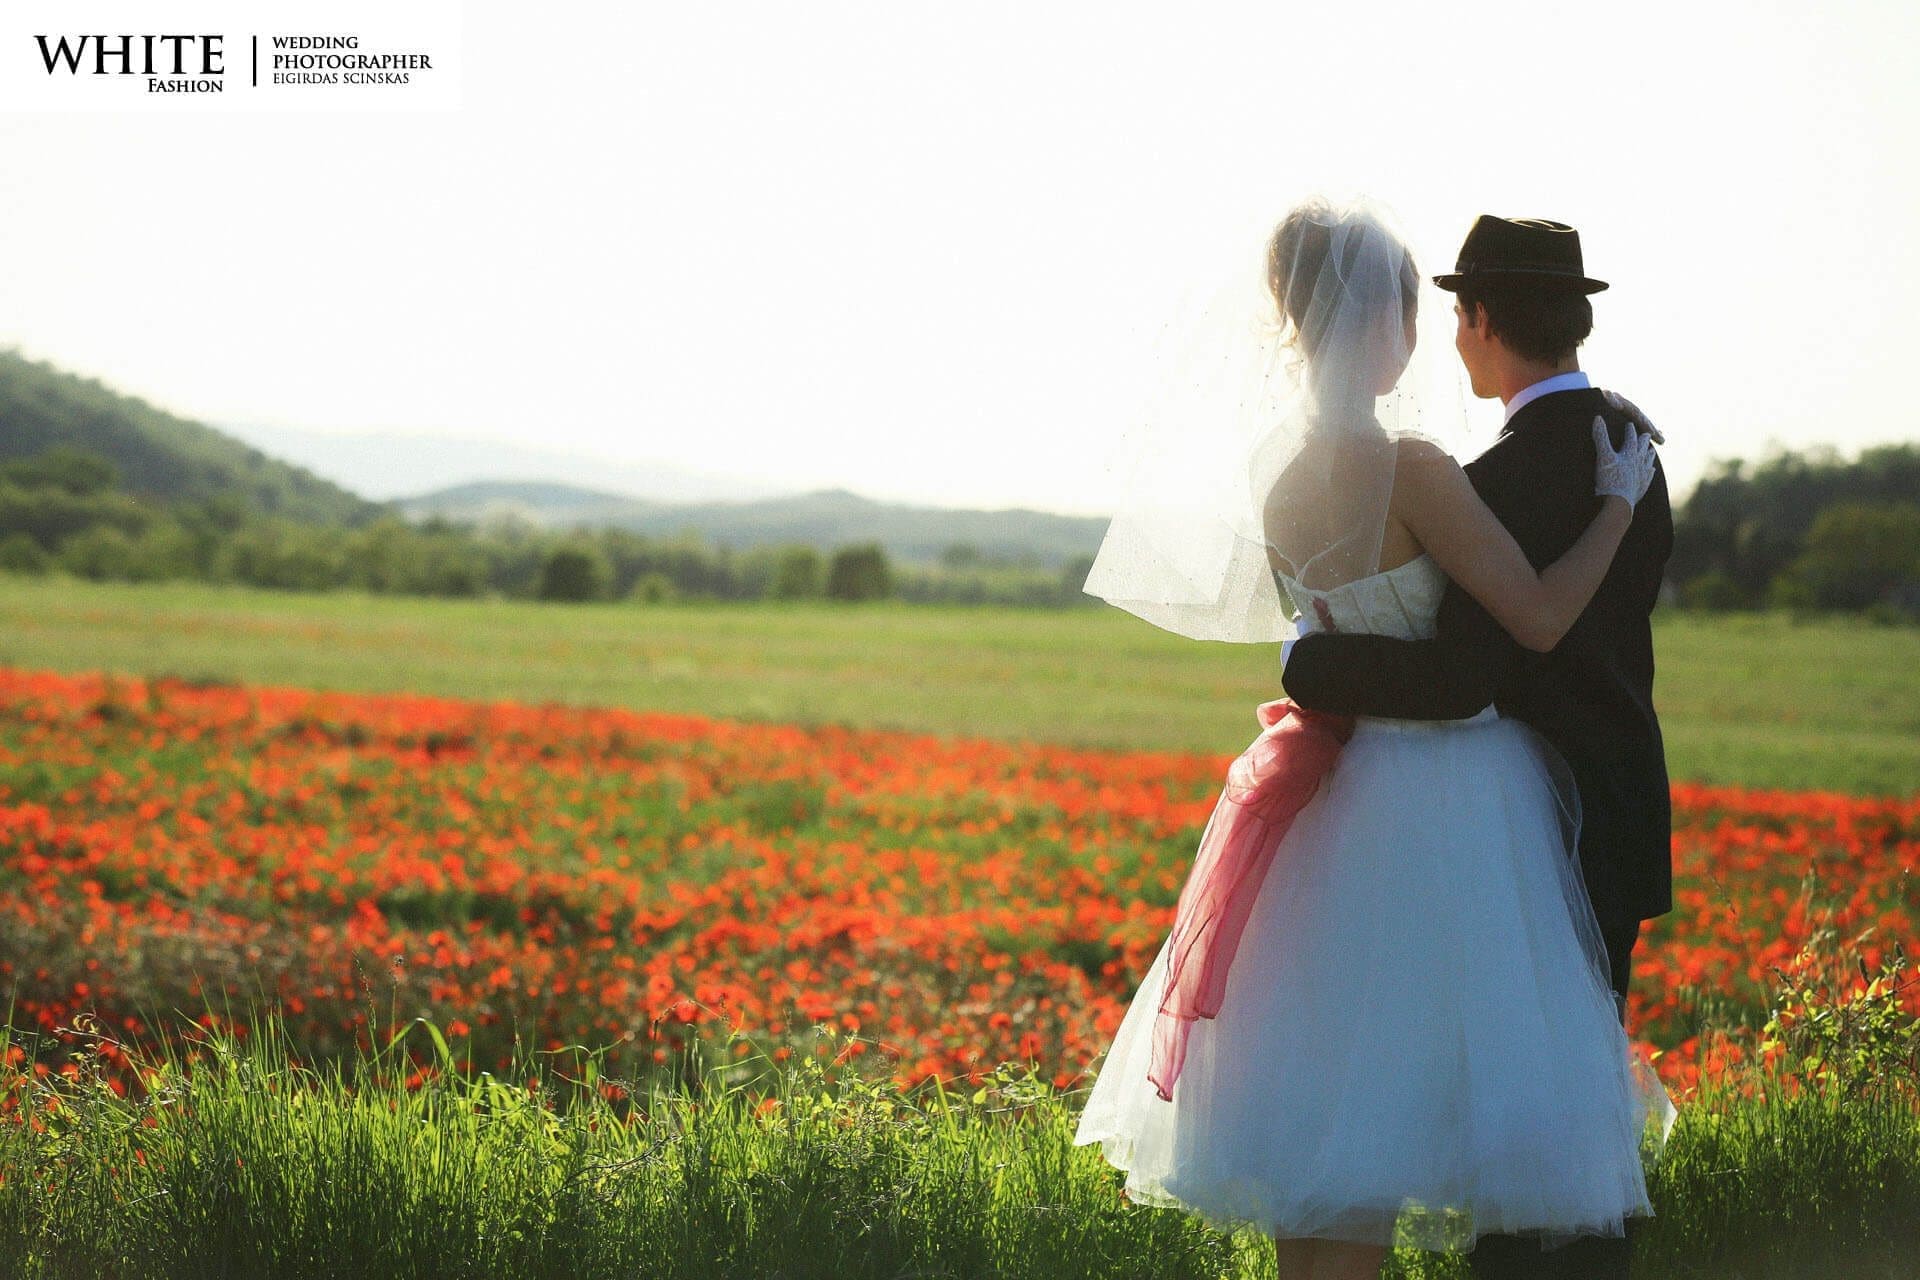 Wedding in Tuscany white fashion photographer russian citizens